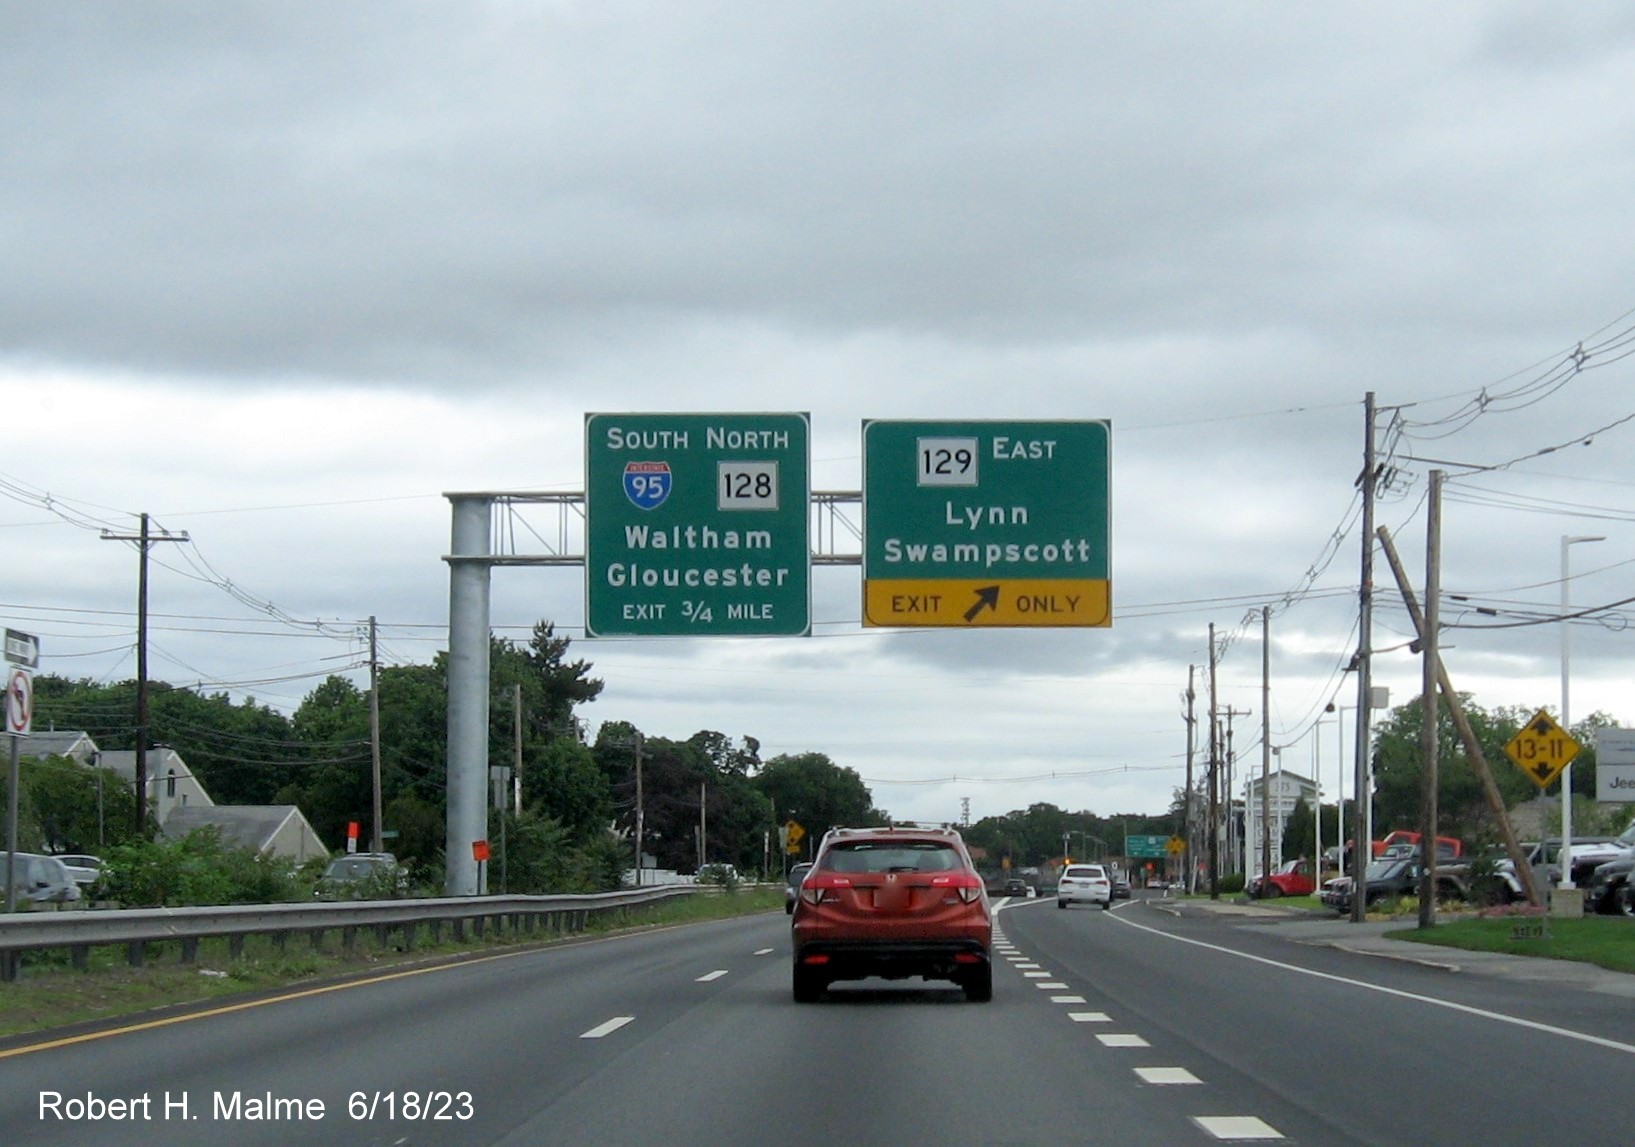 Image of newly placed 3/4 mile advance sign for South I-95/North MA 128 exits on US 1 North in Lynnfield at ramp to MA 129 East, June 2023